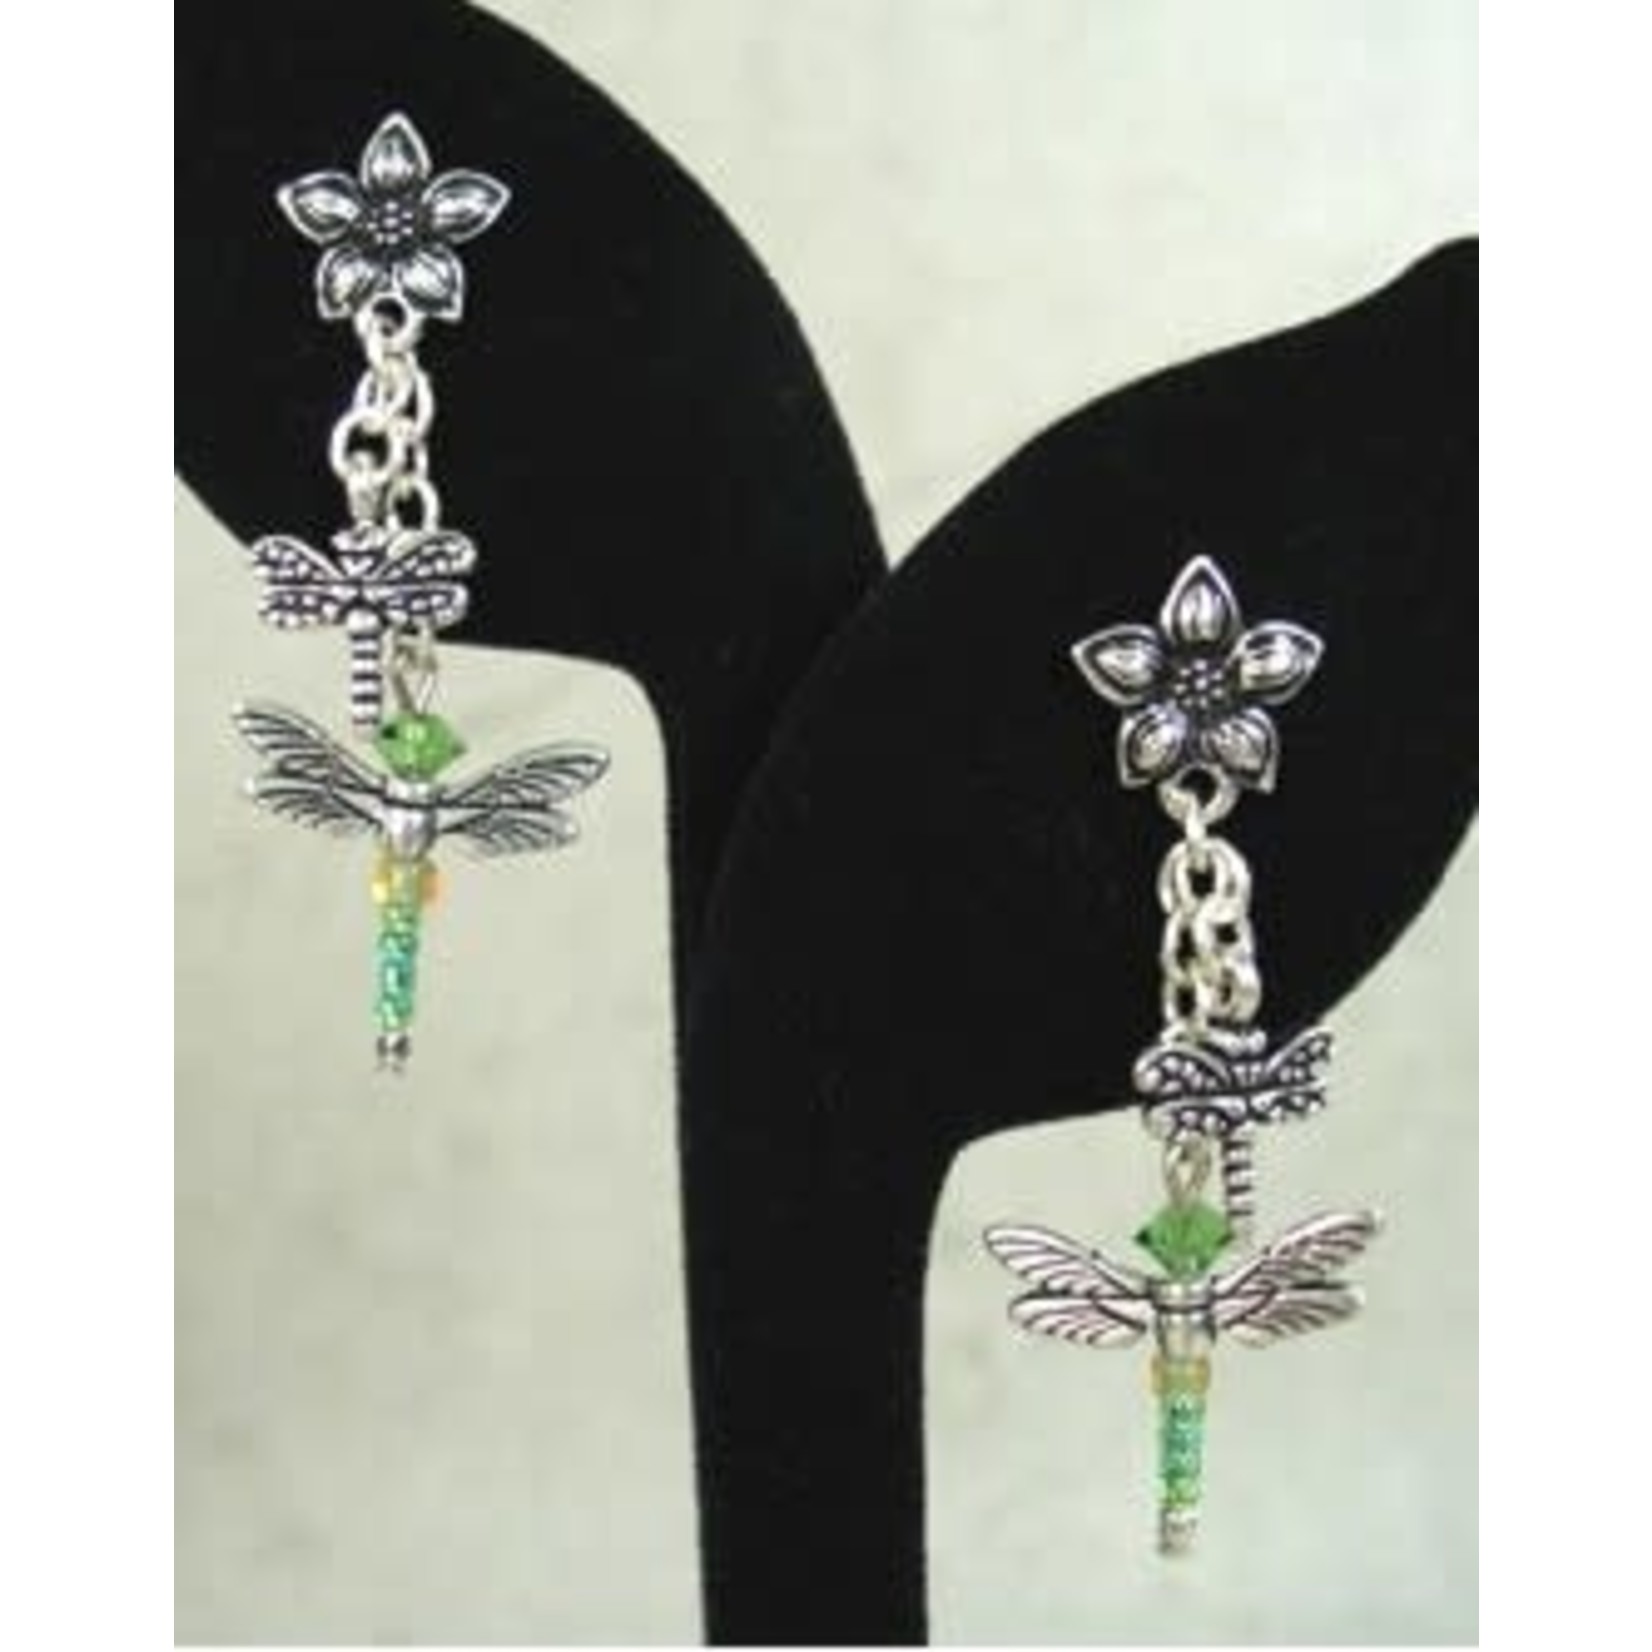 TierraCast Tierracast Antique Gold Plated Dragonfly Wings